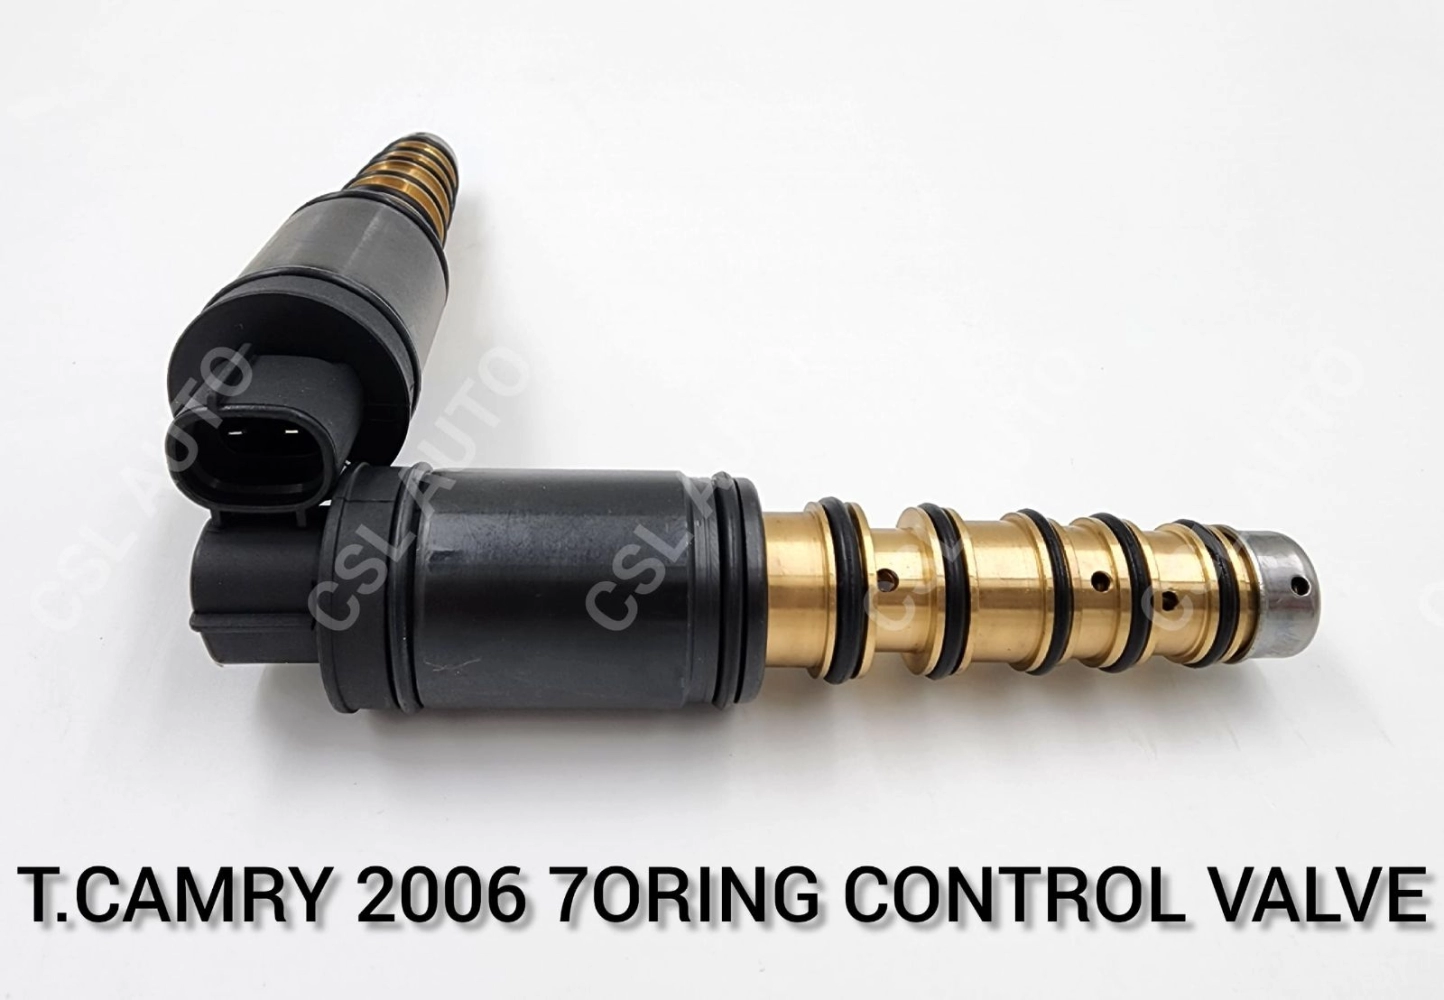 HS 10A15 Toyota Camry 06Y 7Oring Control Valve 